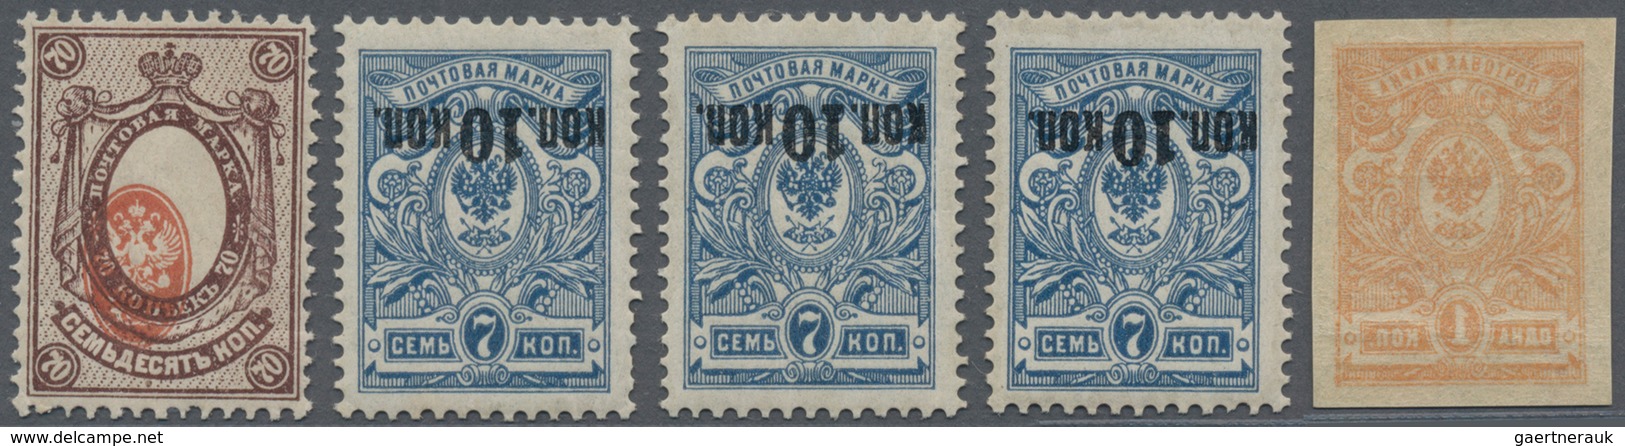 Russland: 1908-18 VARIETIES: Group Of 23 Mint Stamps Showing Varieties Shifted Center (10), Offset P - Gebraucht